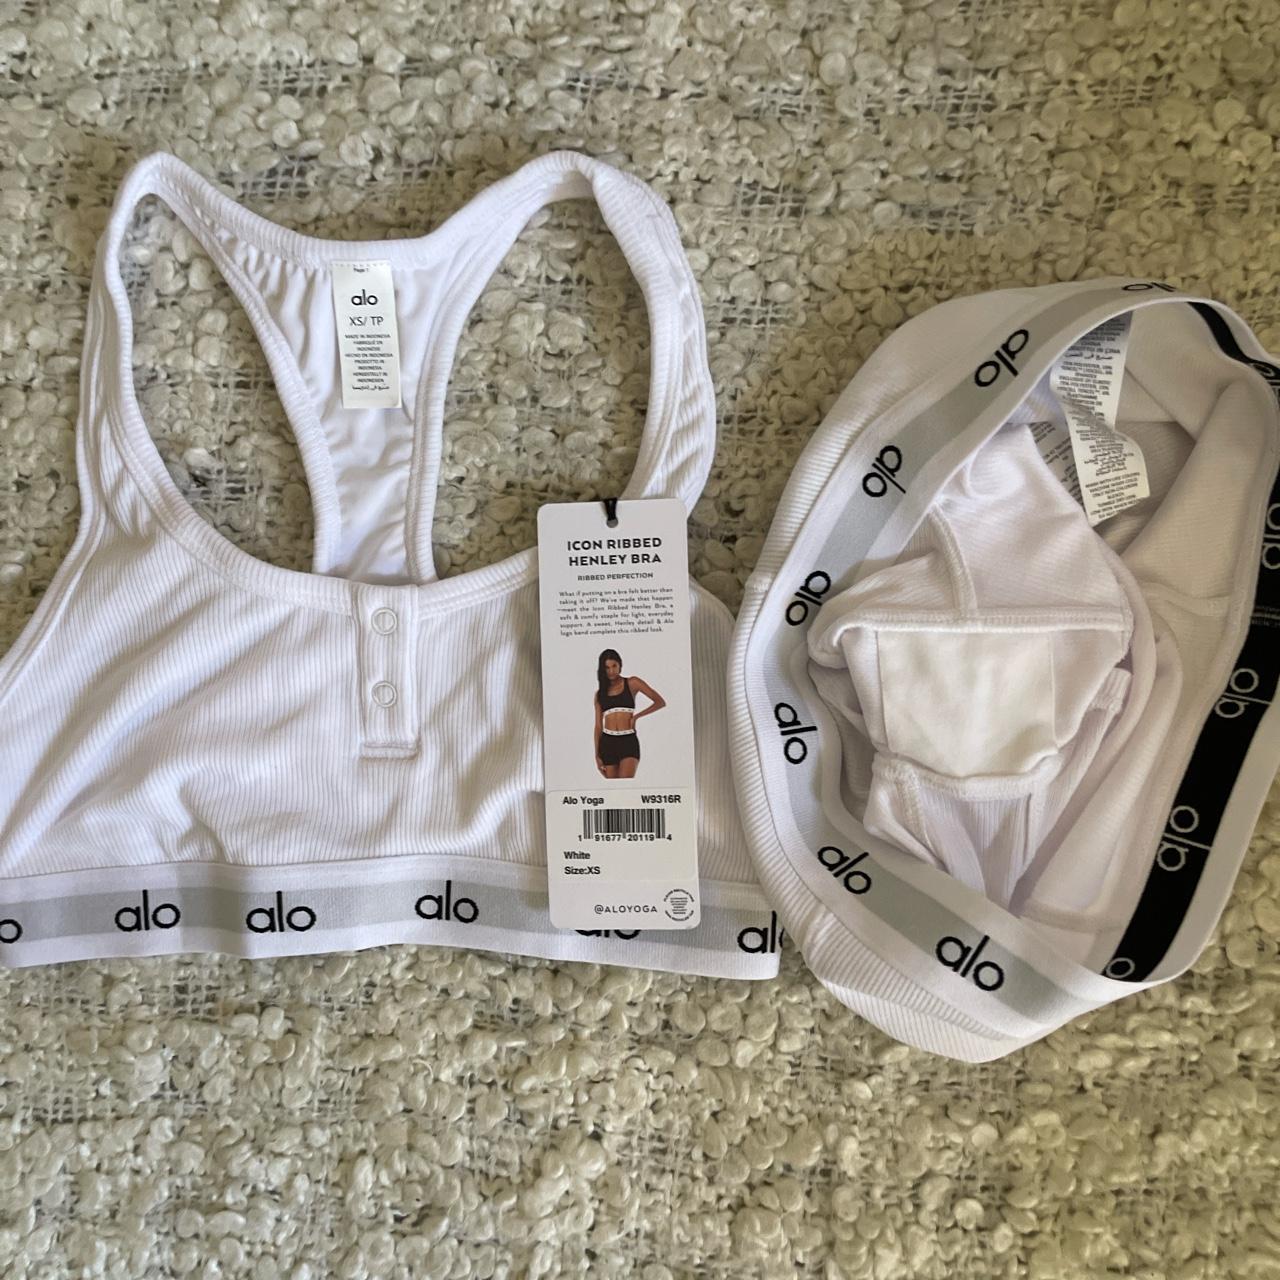 Alo Icon Ribbed Henley Bra and Boy Shorts in White - Depop